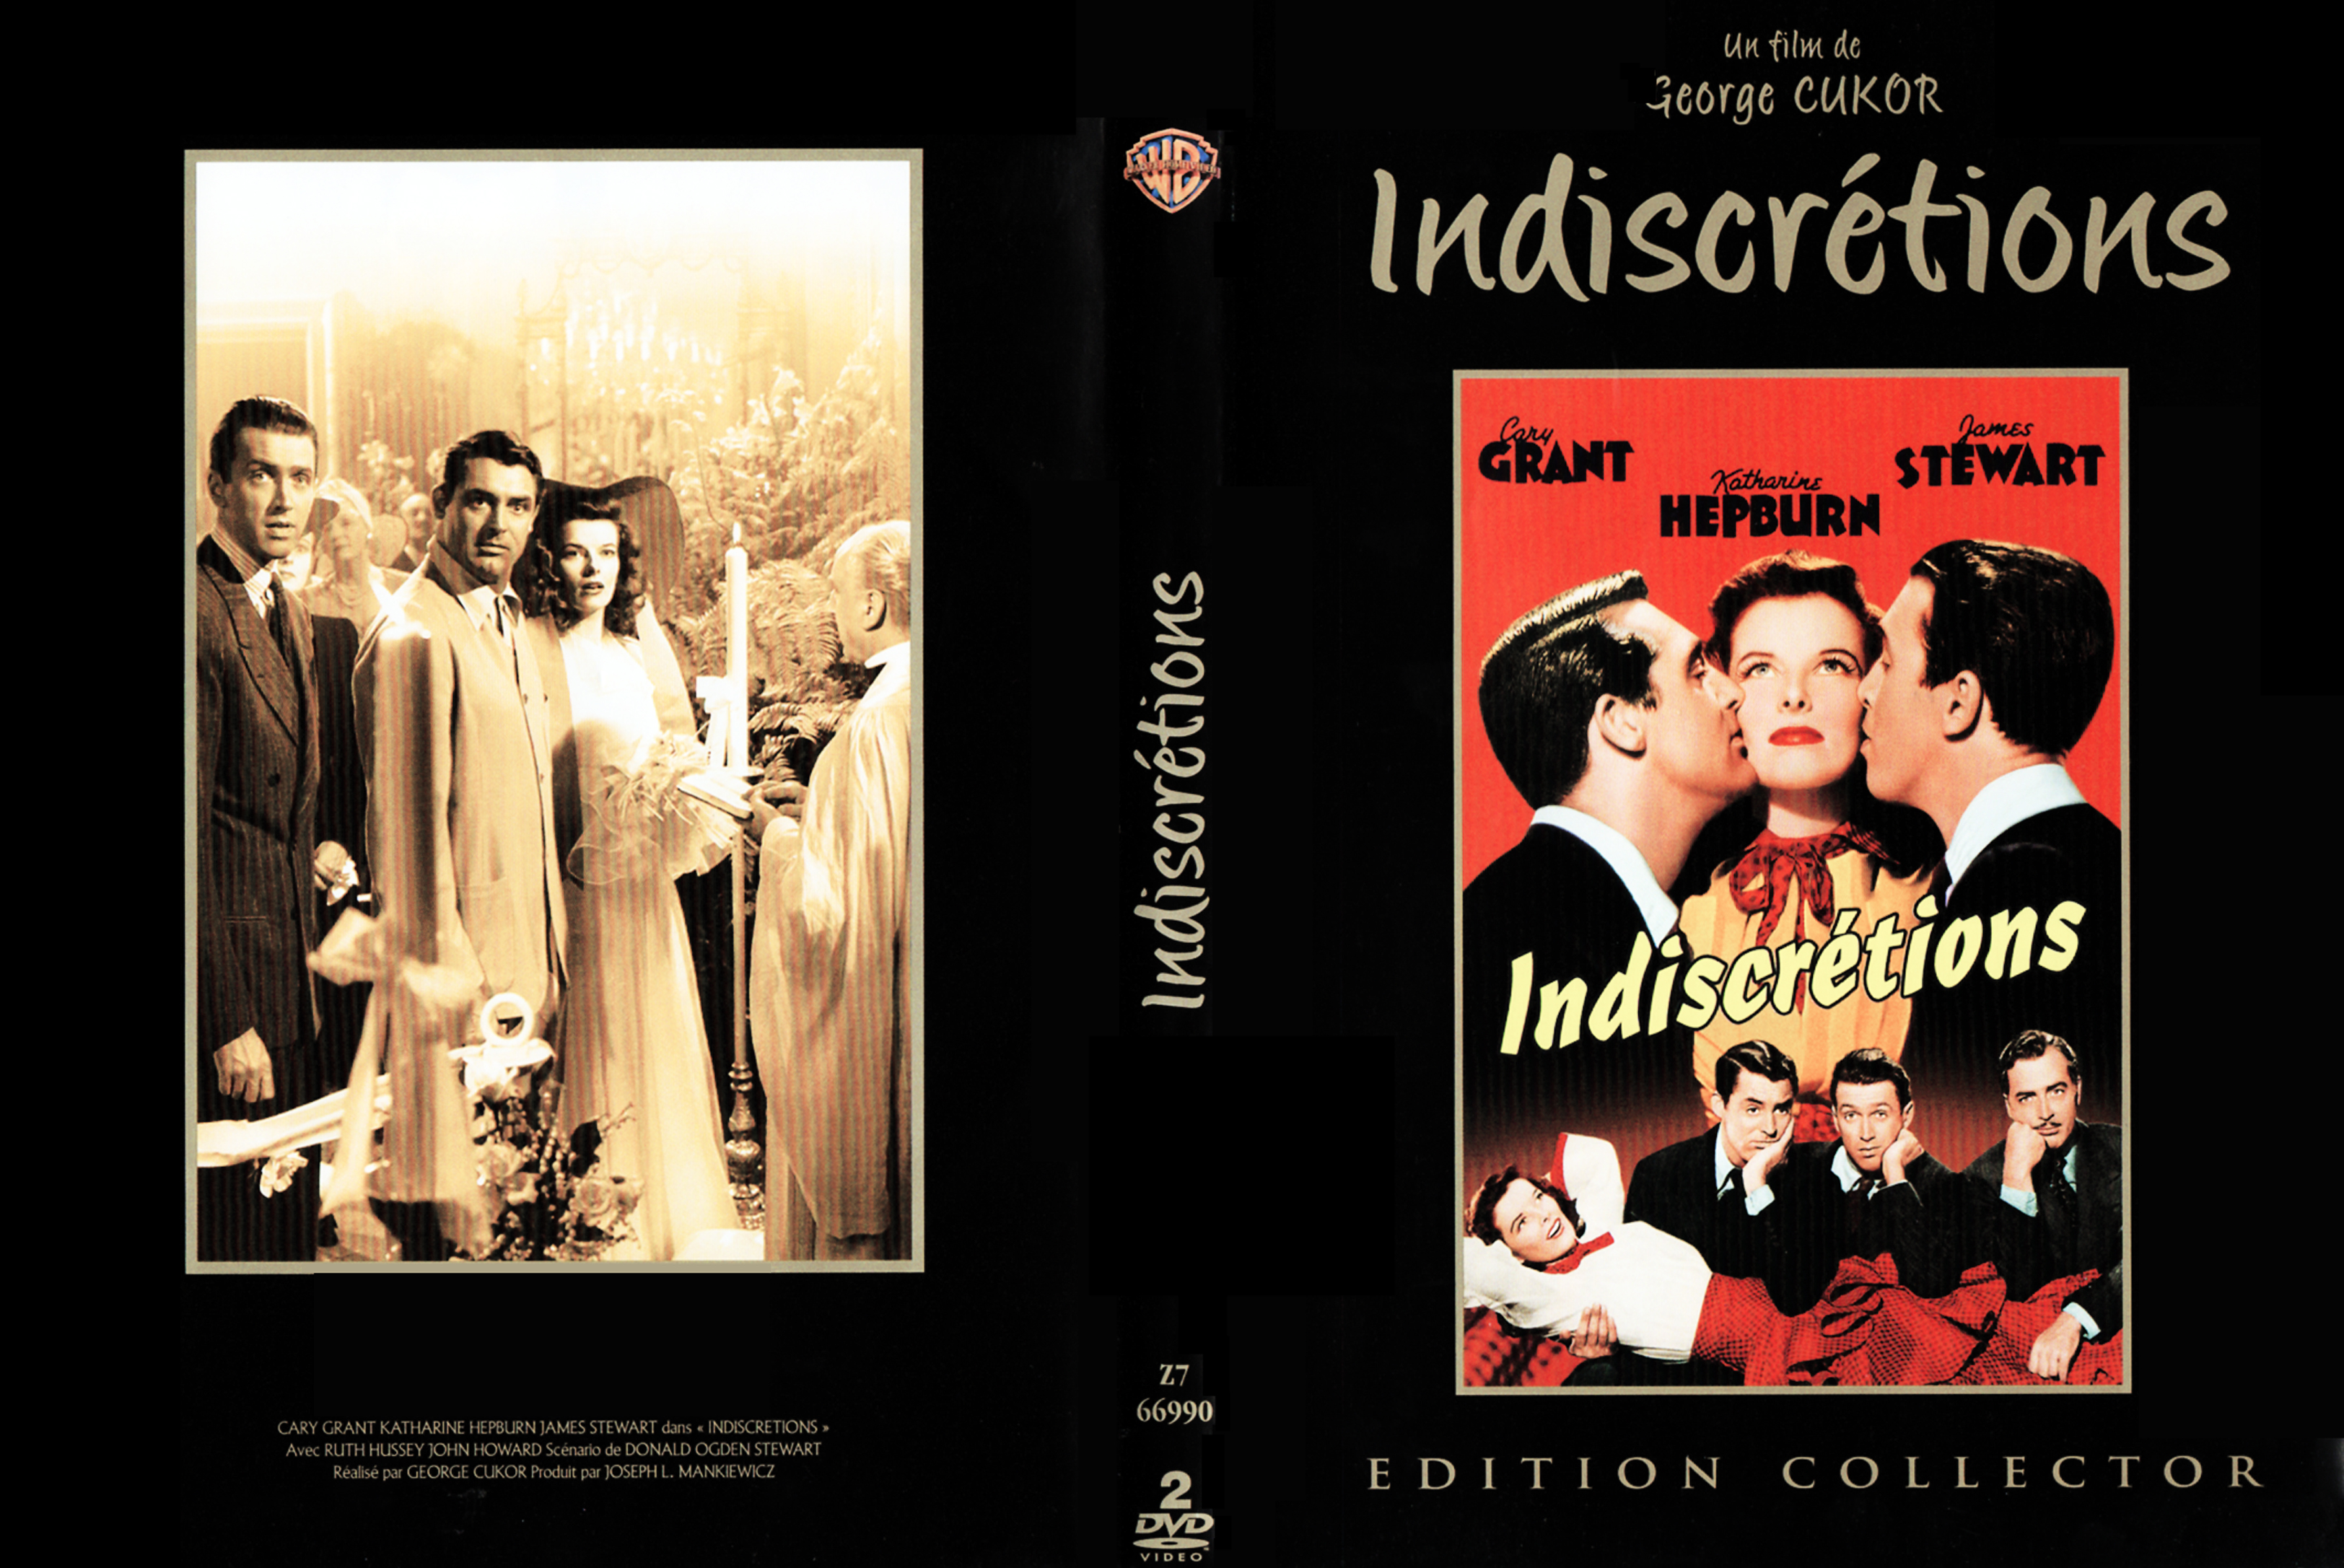 Jaquette DVD Indiscrtions